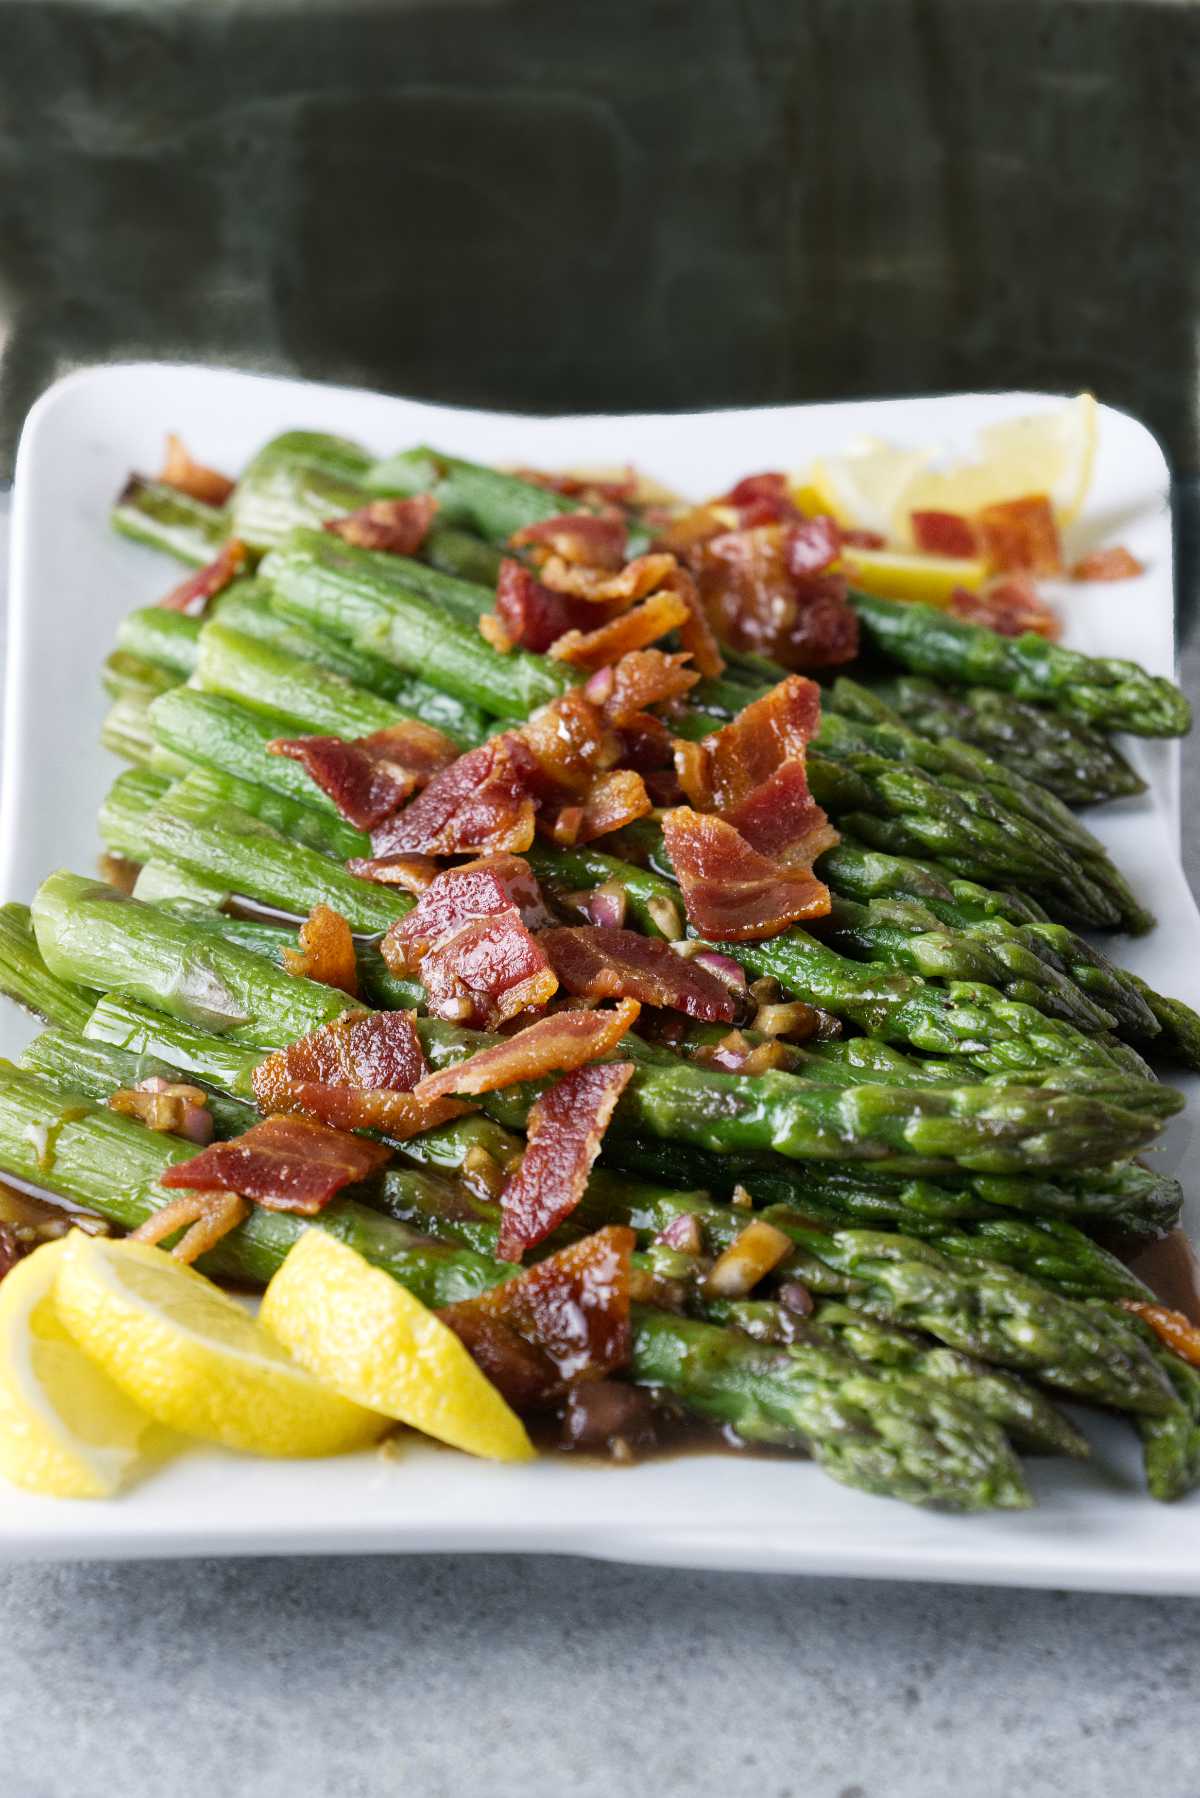 Asparagus cooked and plated with crumbled bacon, vinaigrette, and lemon wedges.